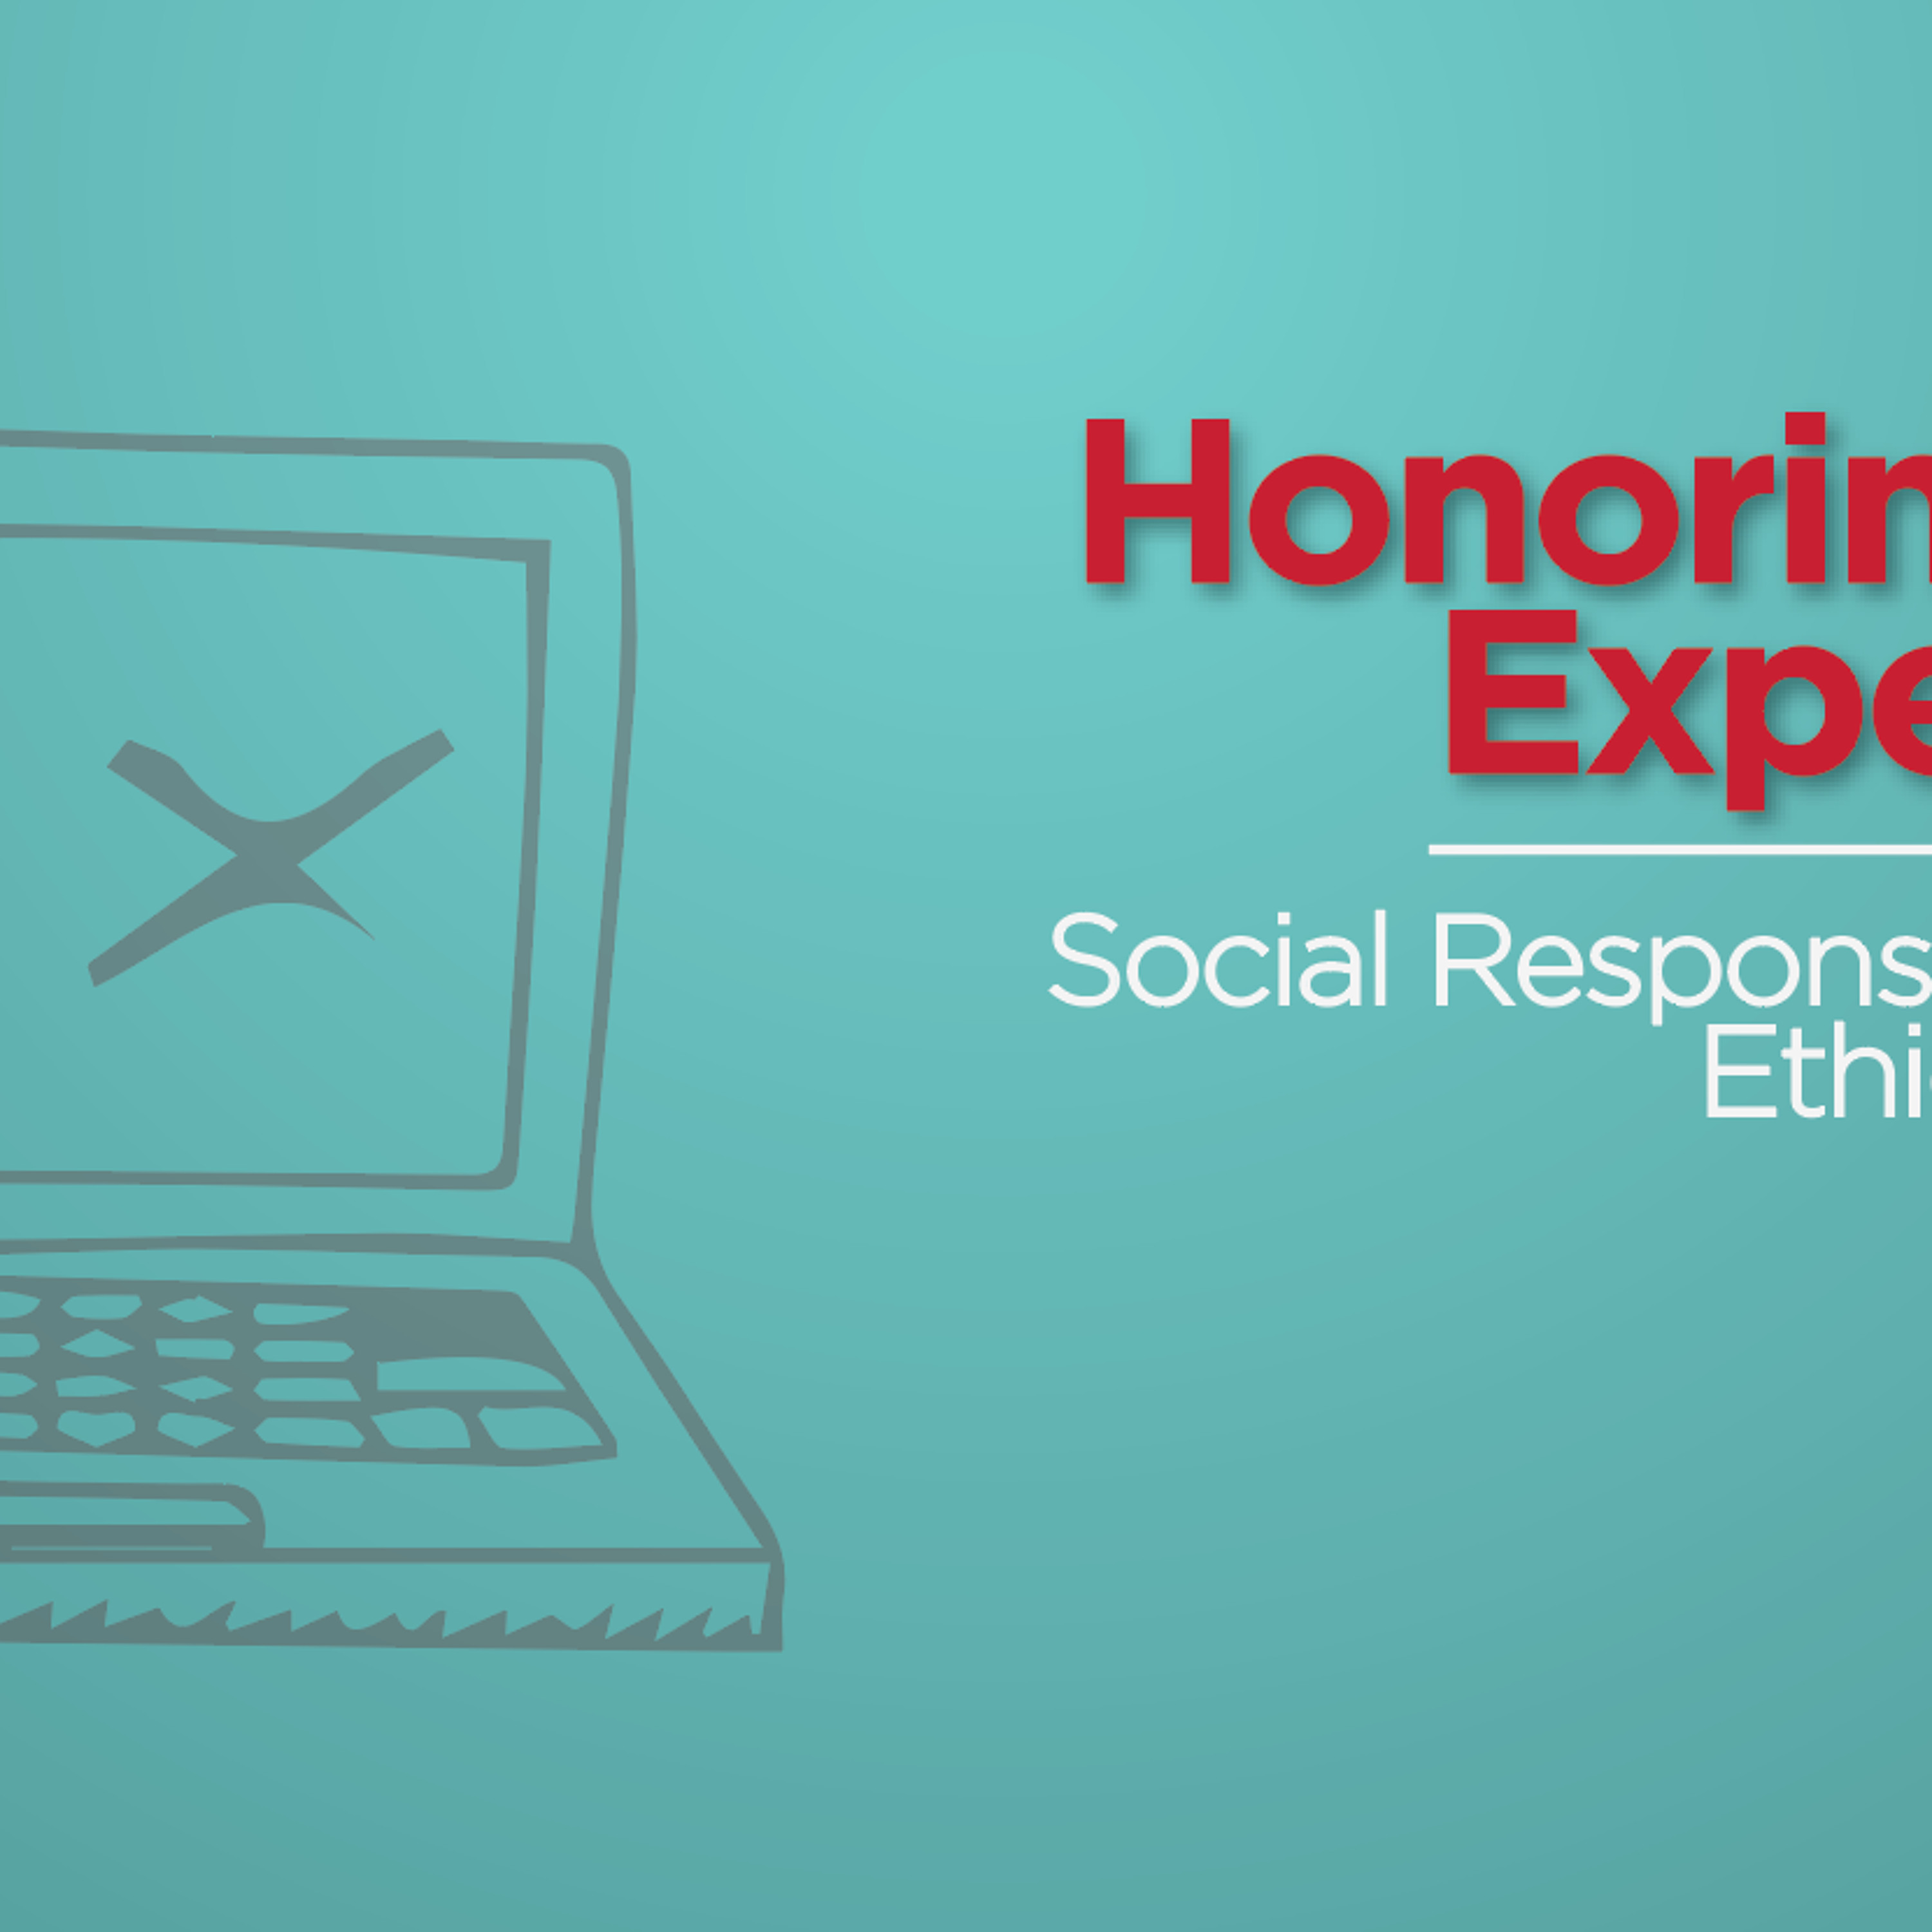 Honoring All Expertise: Social Responsibility and Ethics in Tech